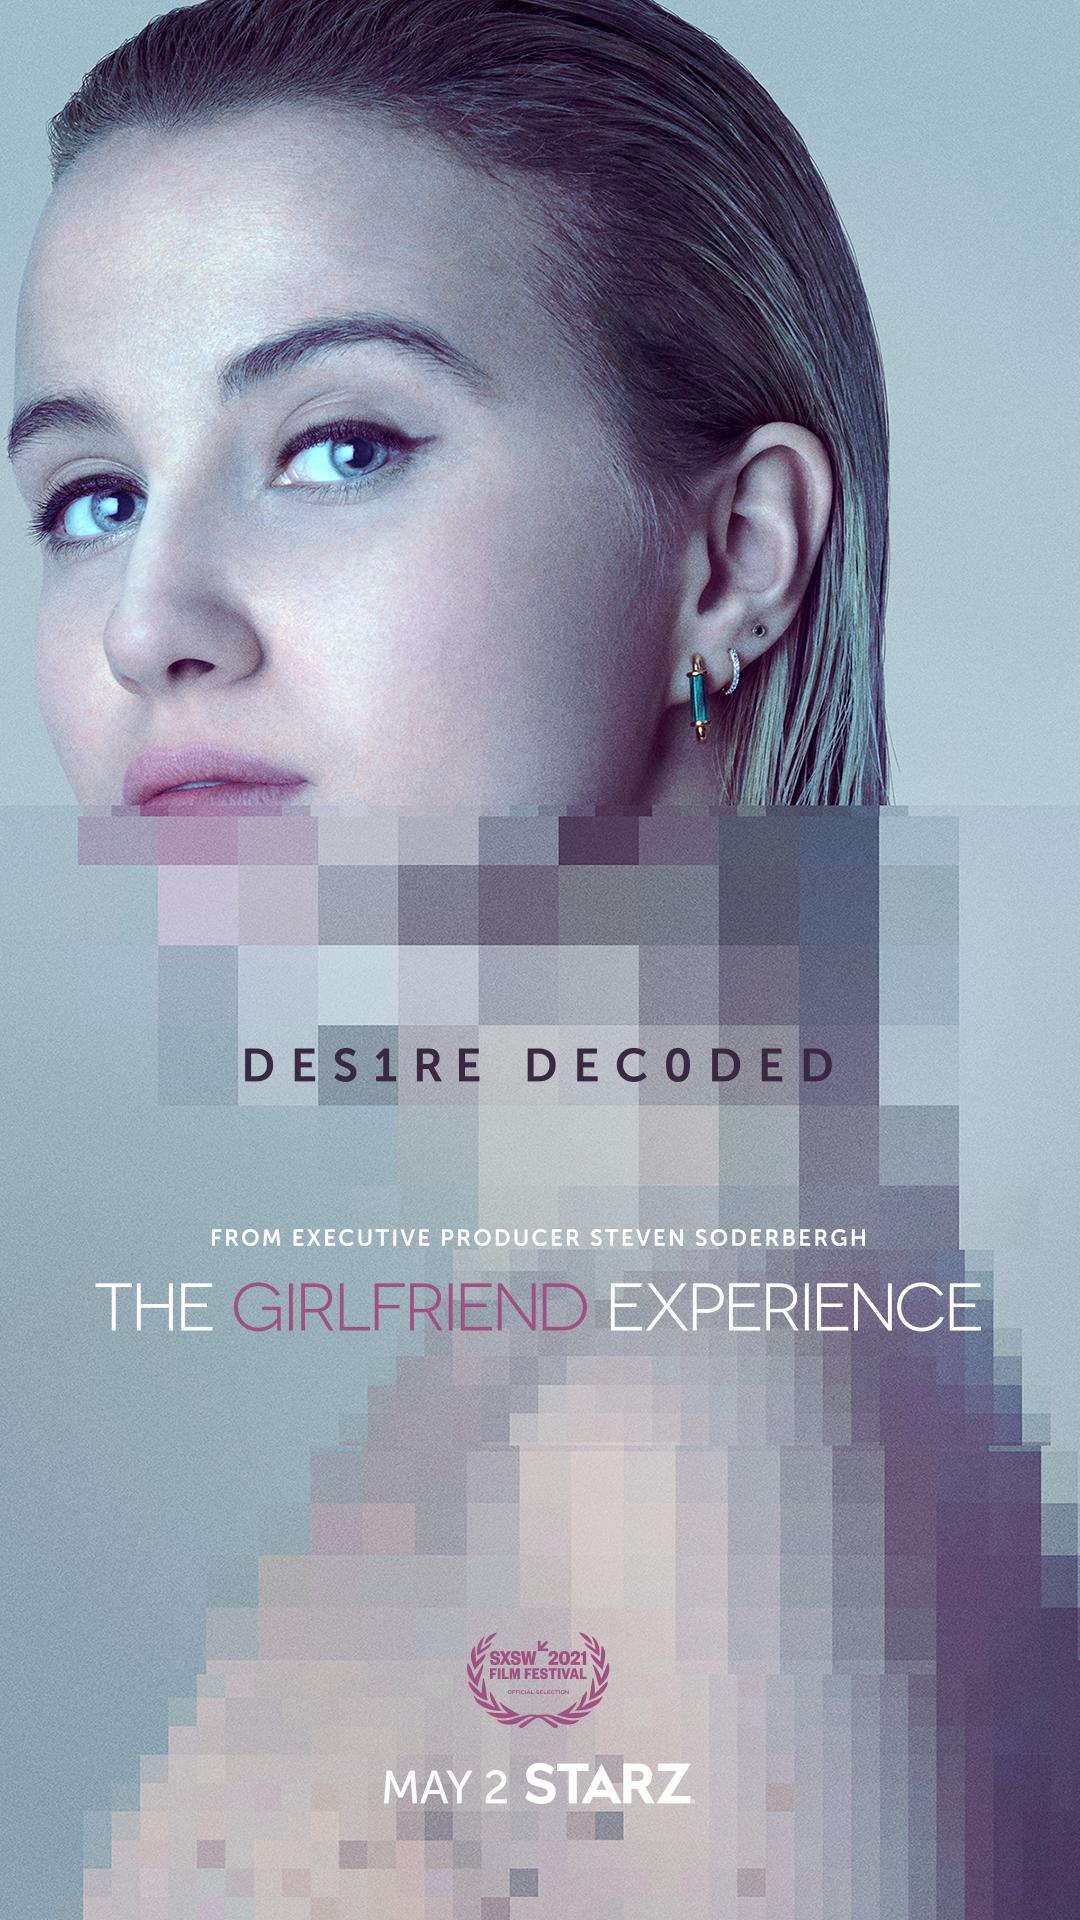 Woman with text "Des1re Dec0ded" then Text "The Girlfriend Experience" - poster